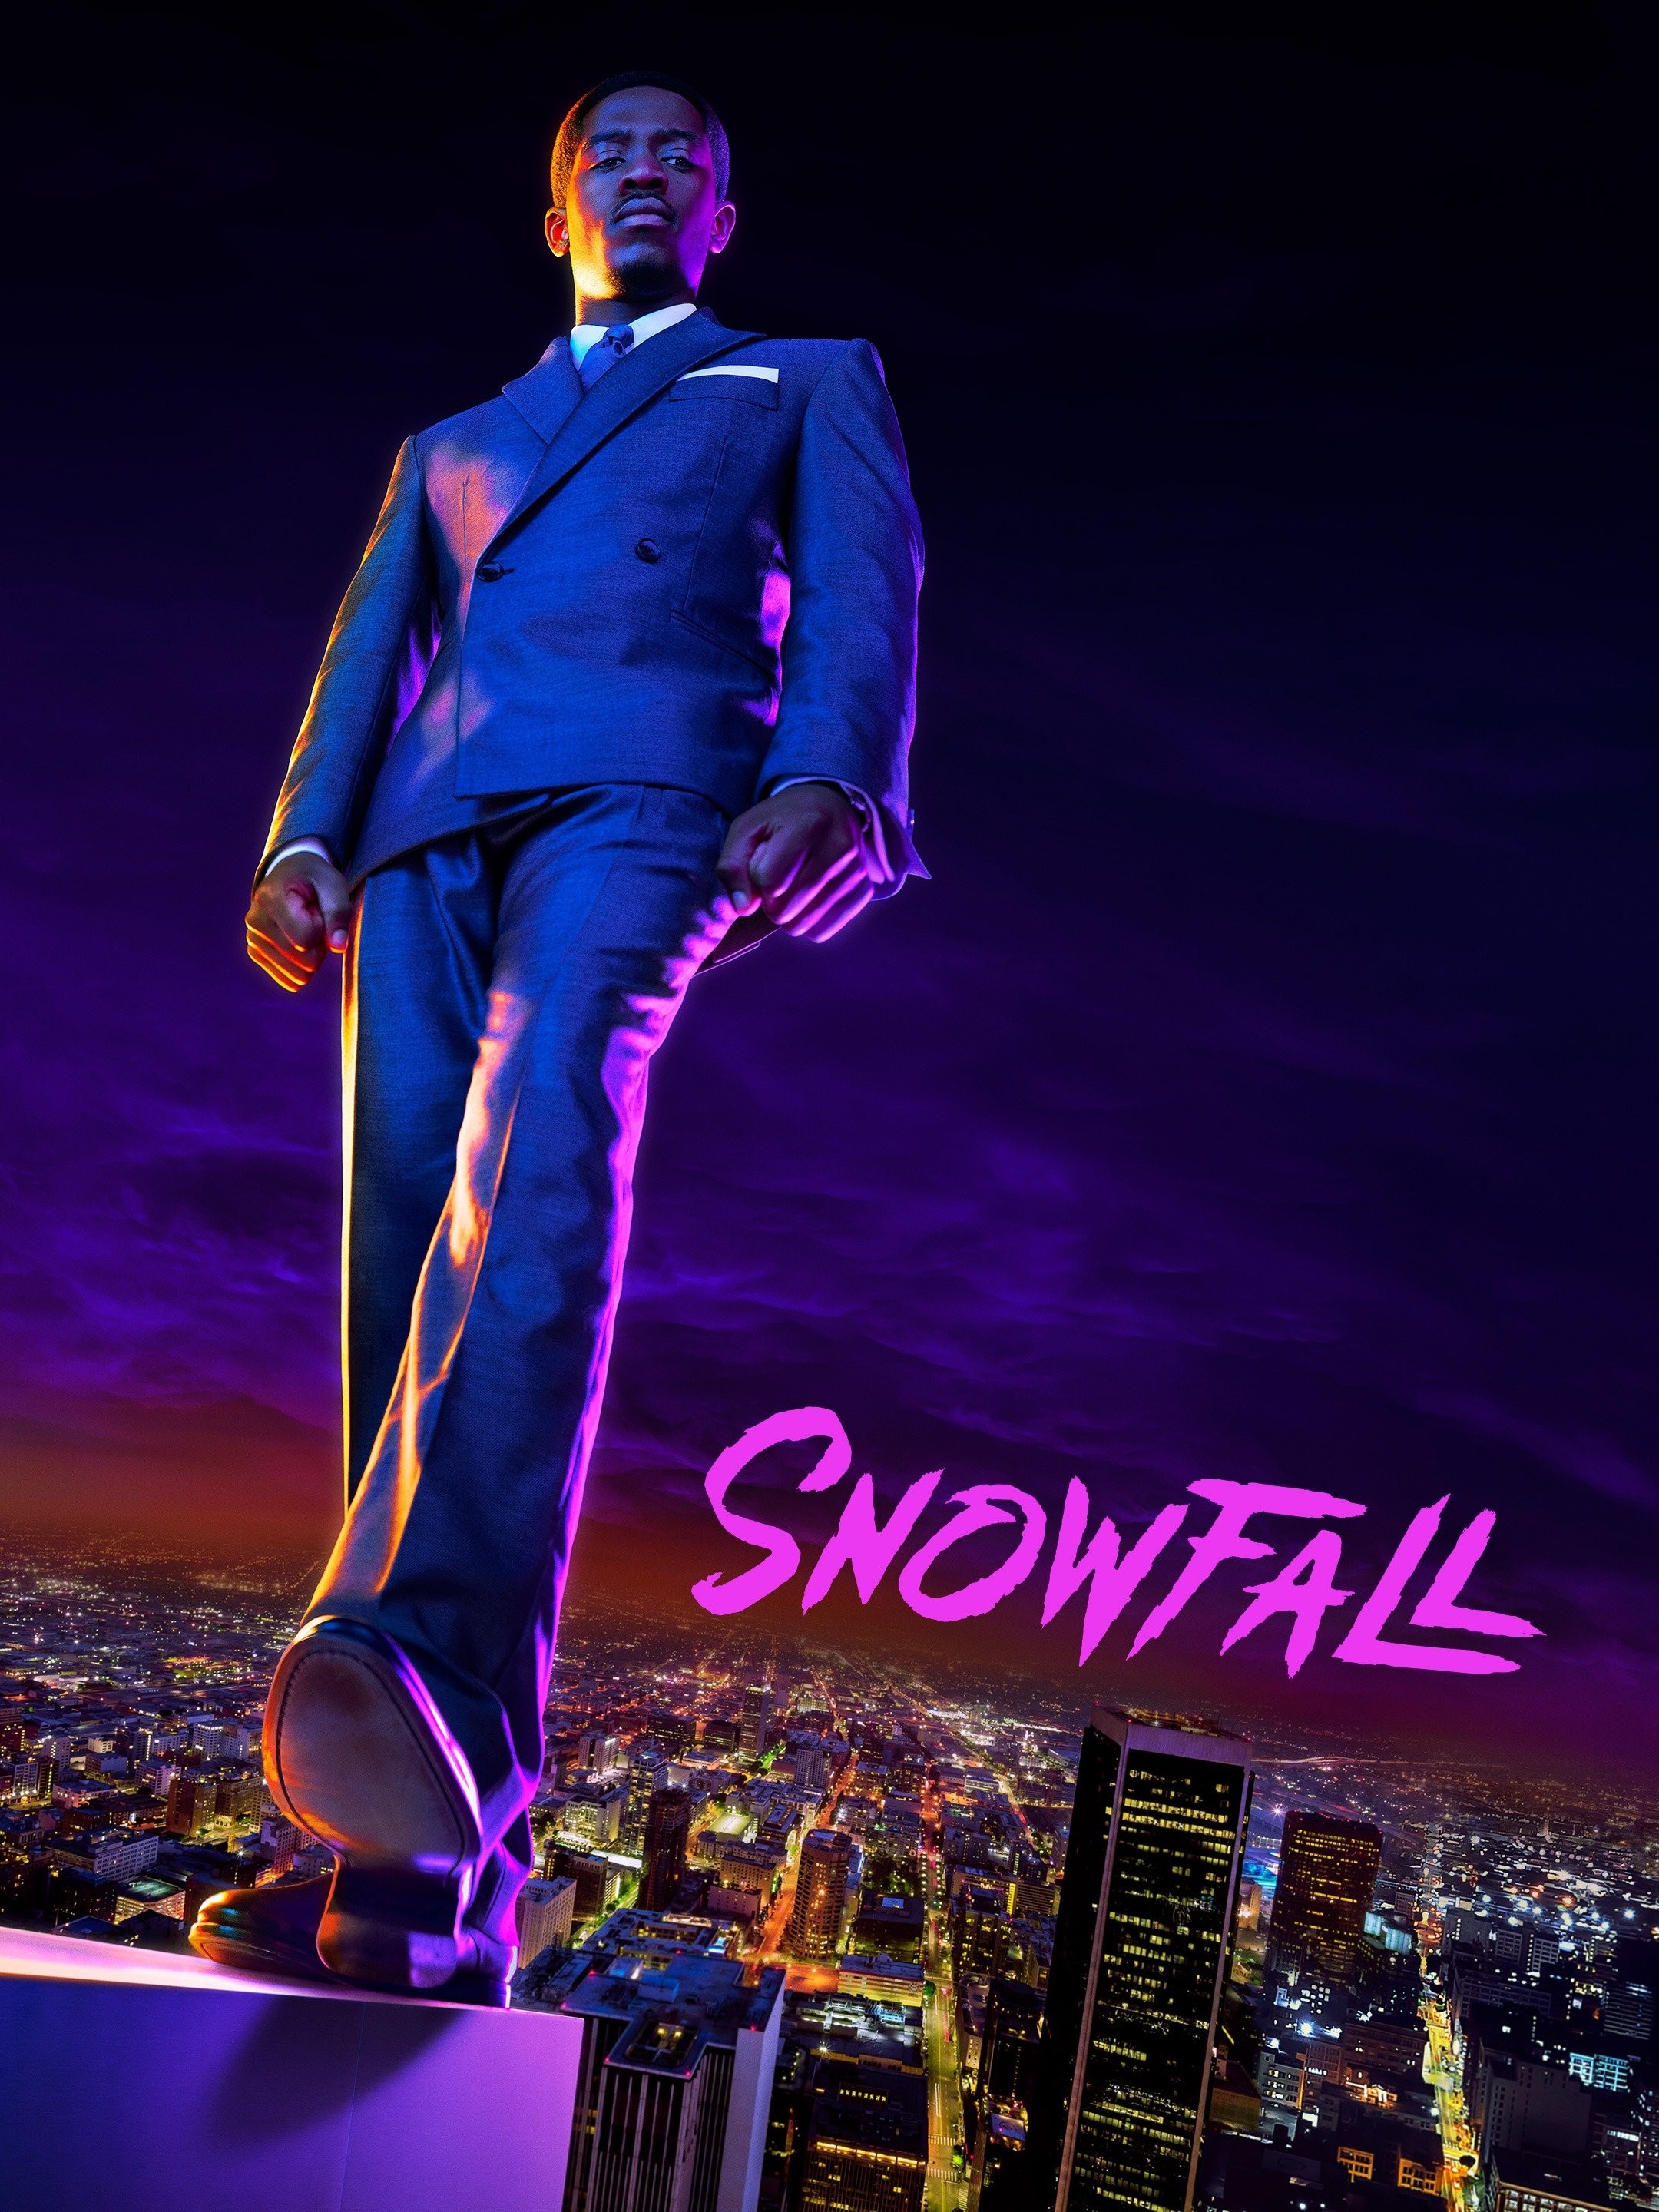 Snowfall season 5 - release date UK, episodes, cast and plot